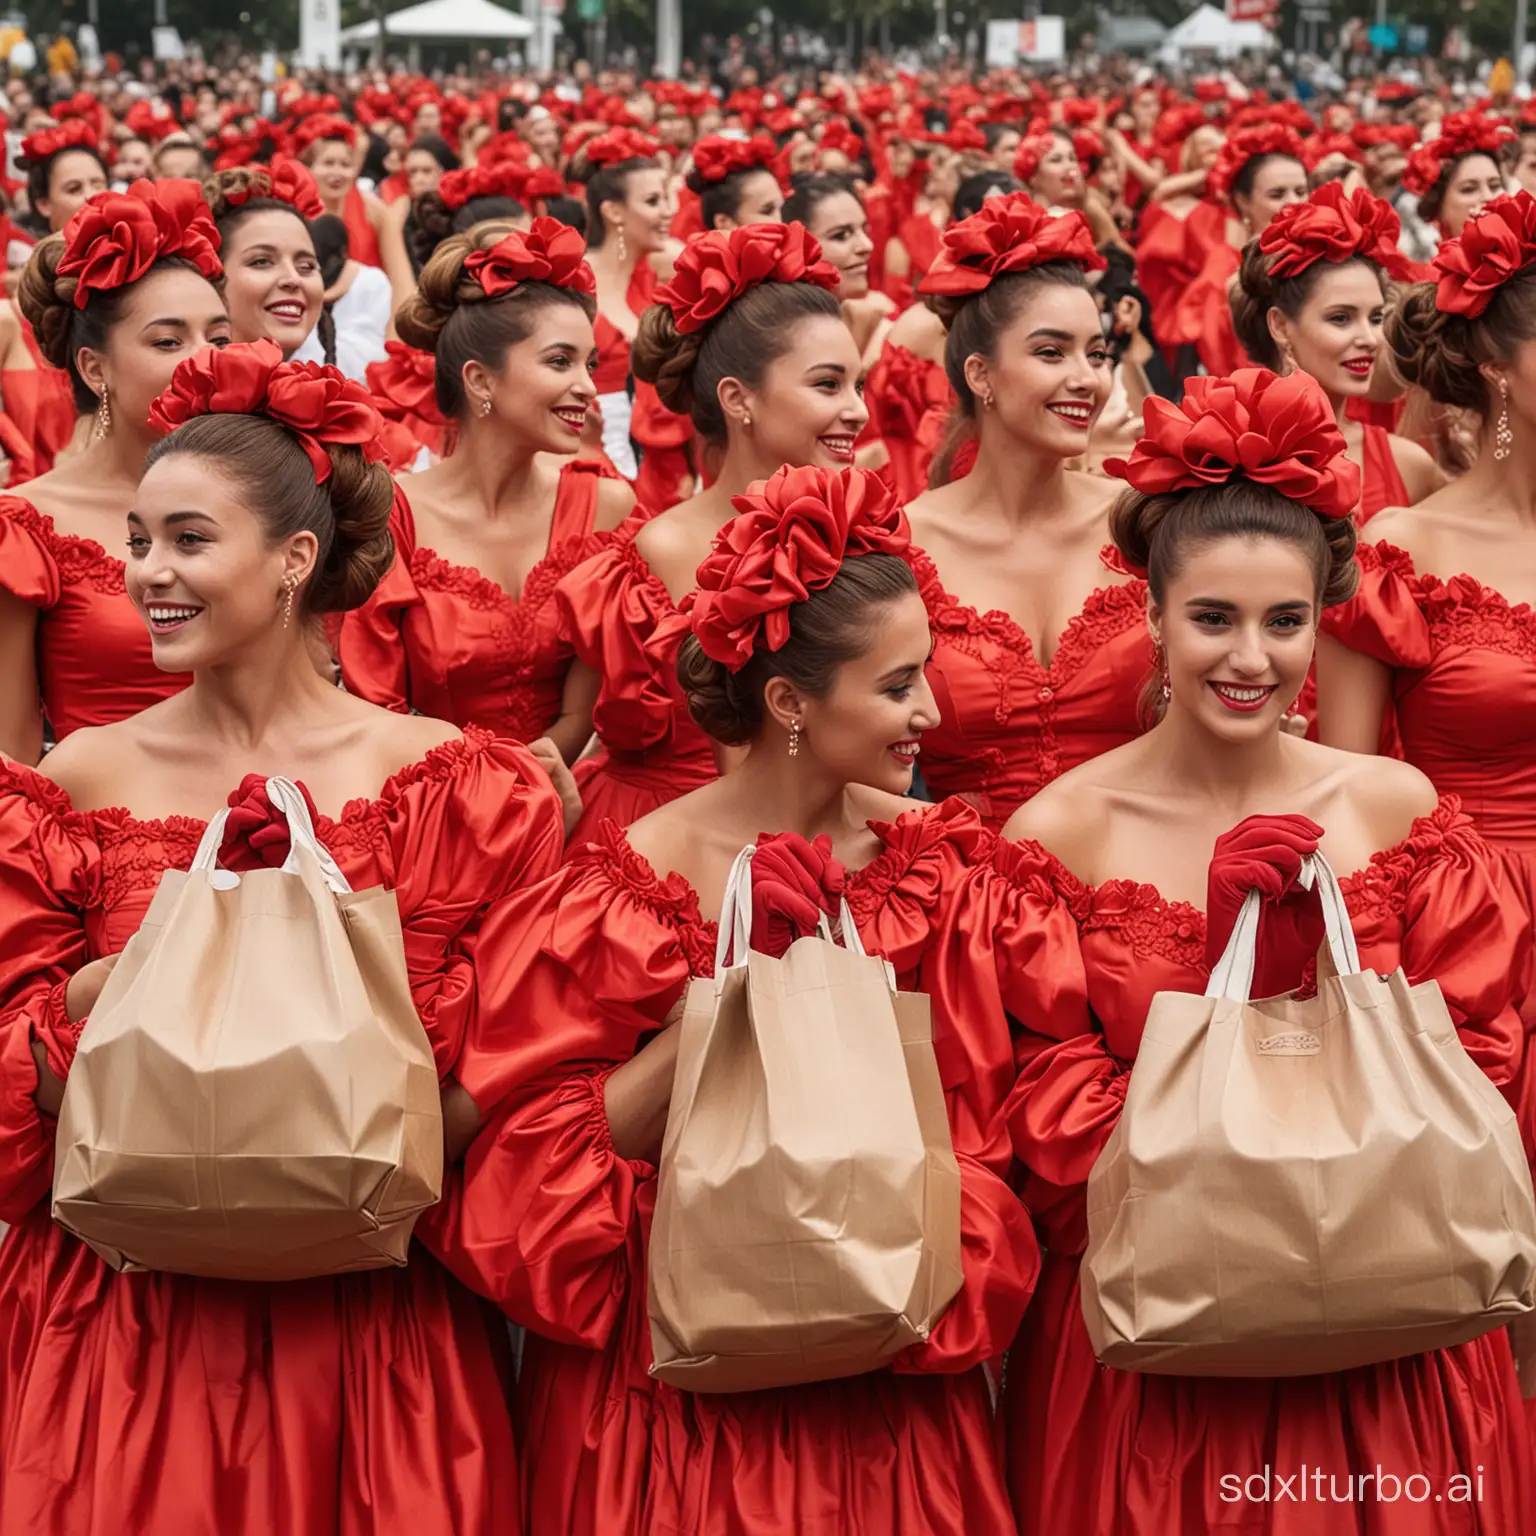 Crowd of women with voluminous red gala dresses, hair in a bun with a flower on top, and red gloves carrying bags together at Shopping Interlagos.